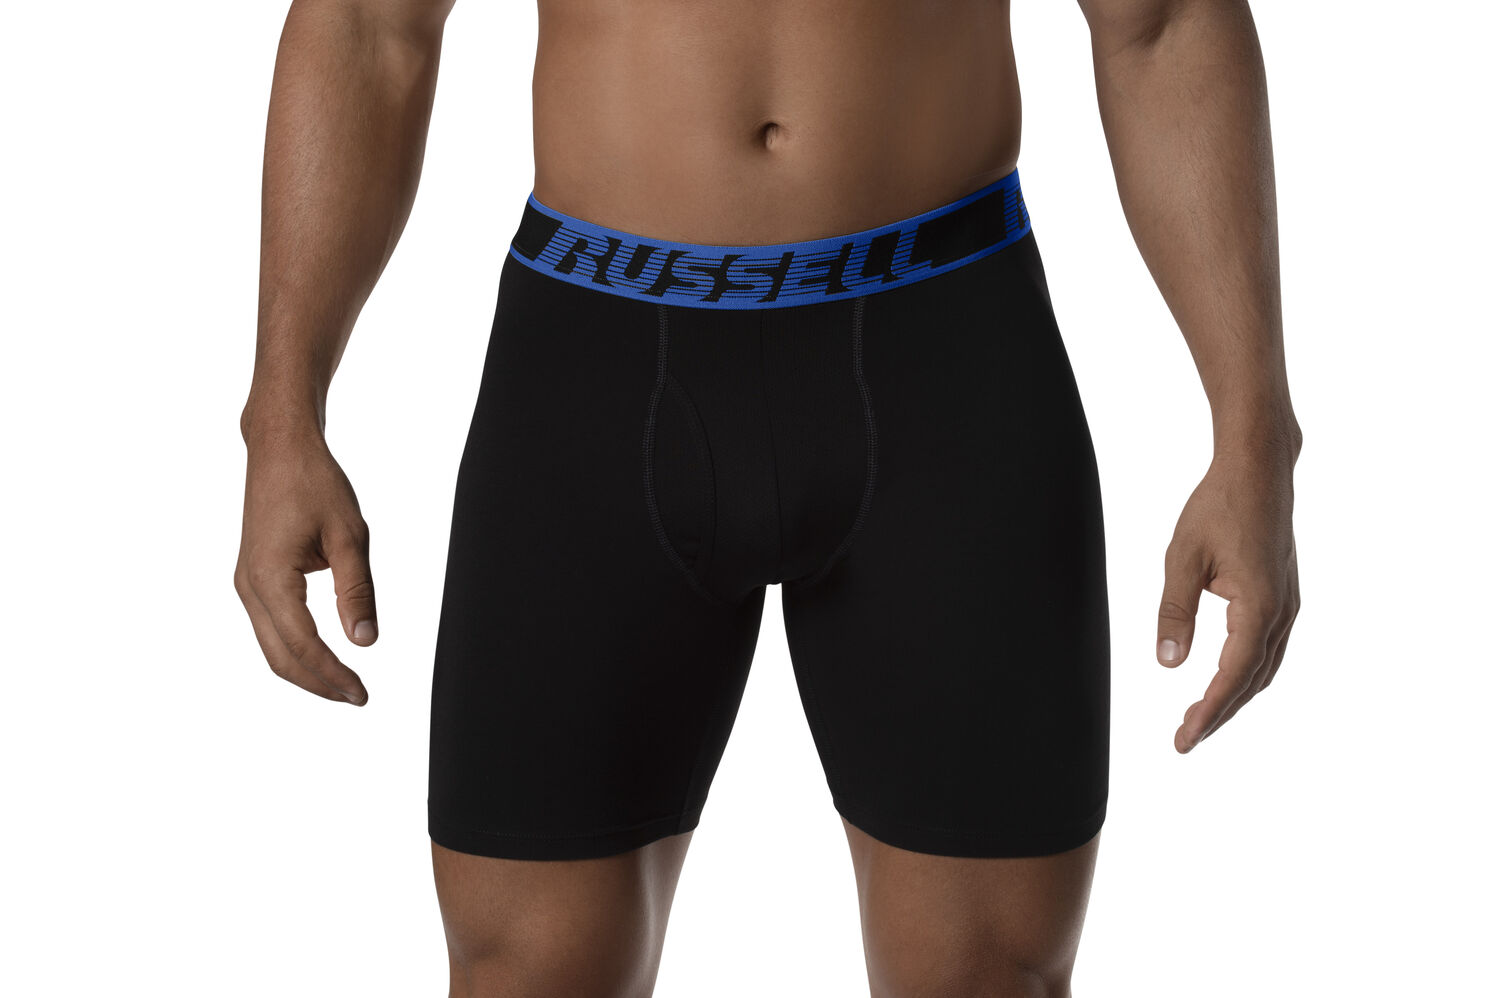 Russell Athletic Men's Coolforce 360 Ventilation Performance Boxer